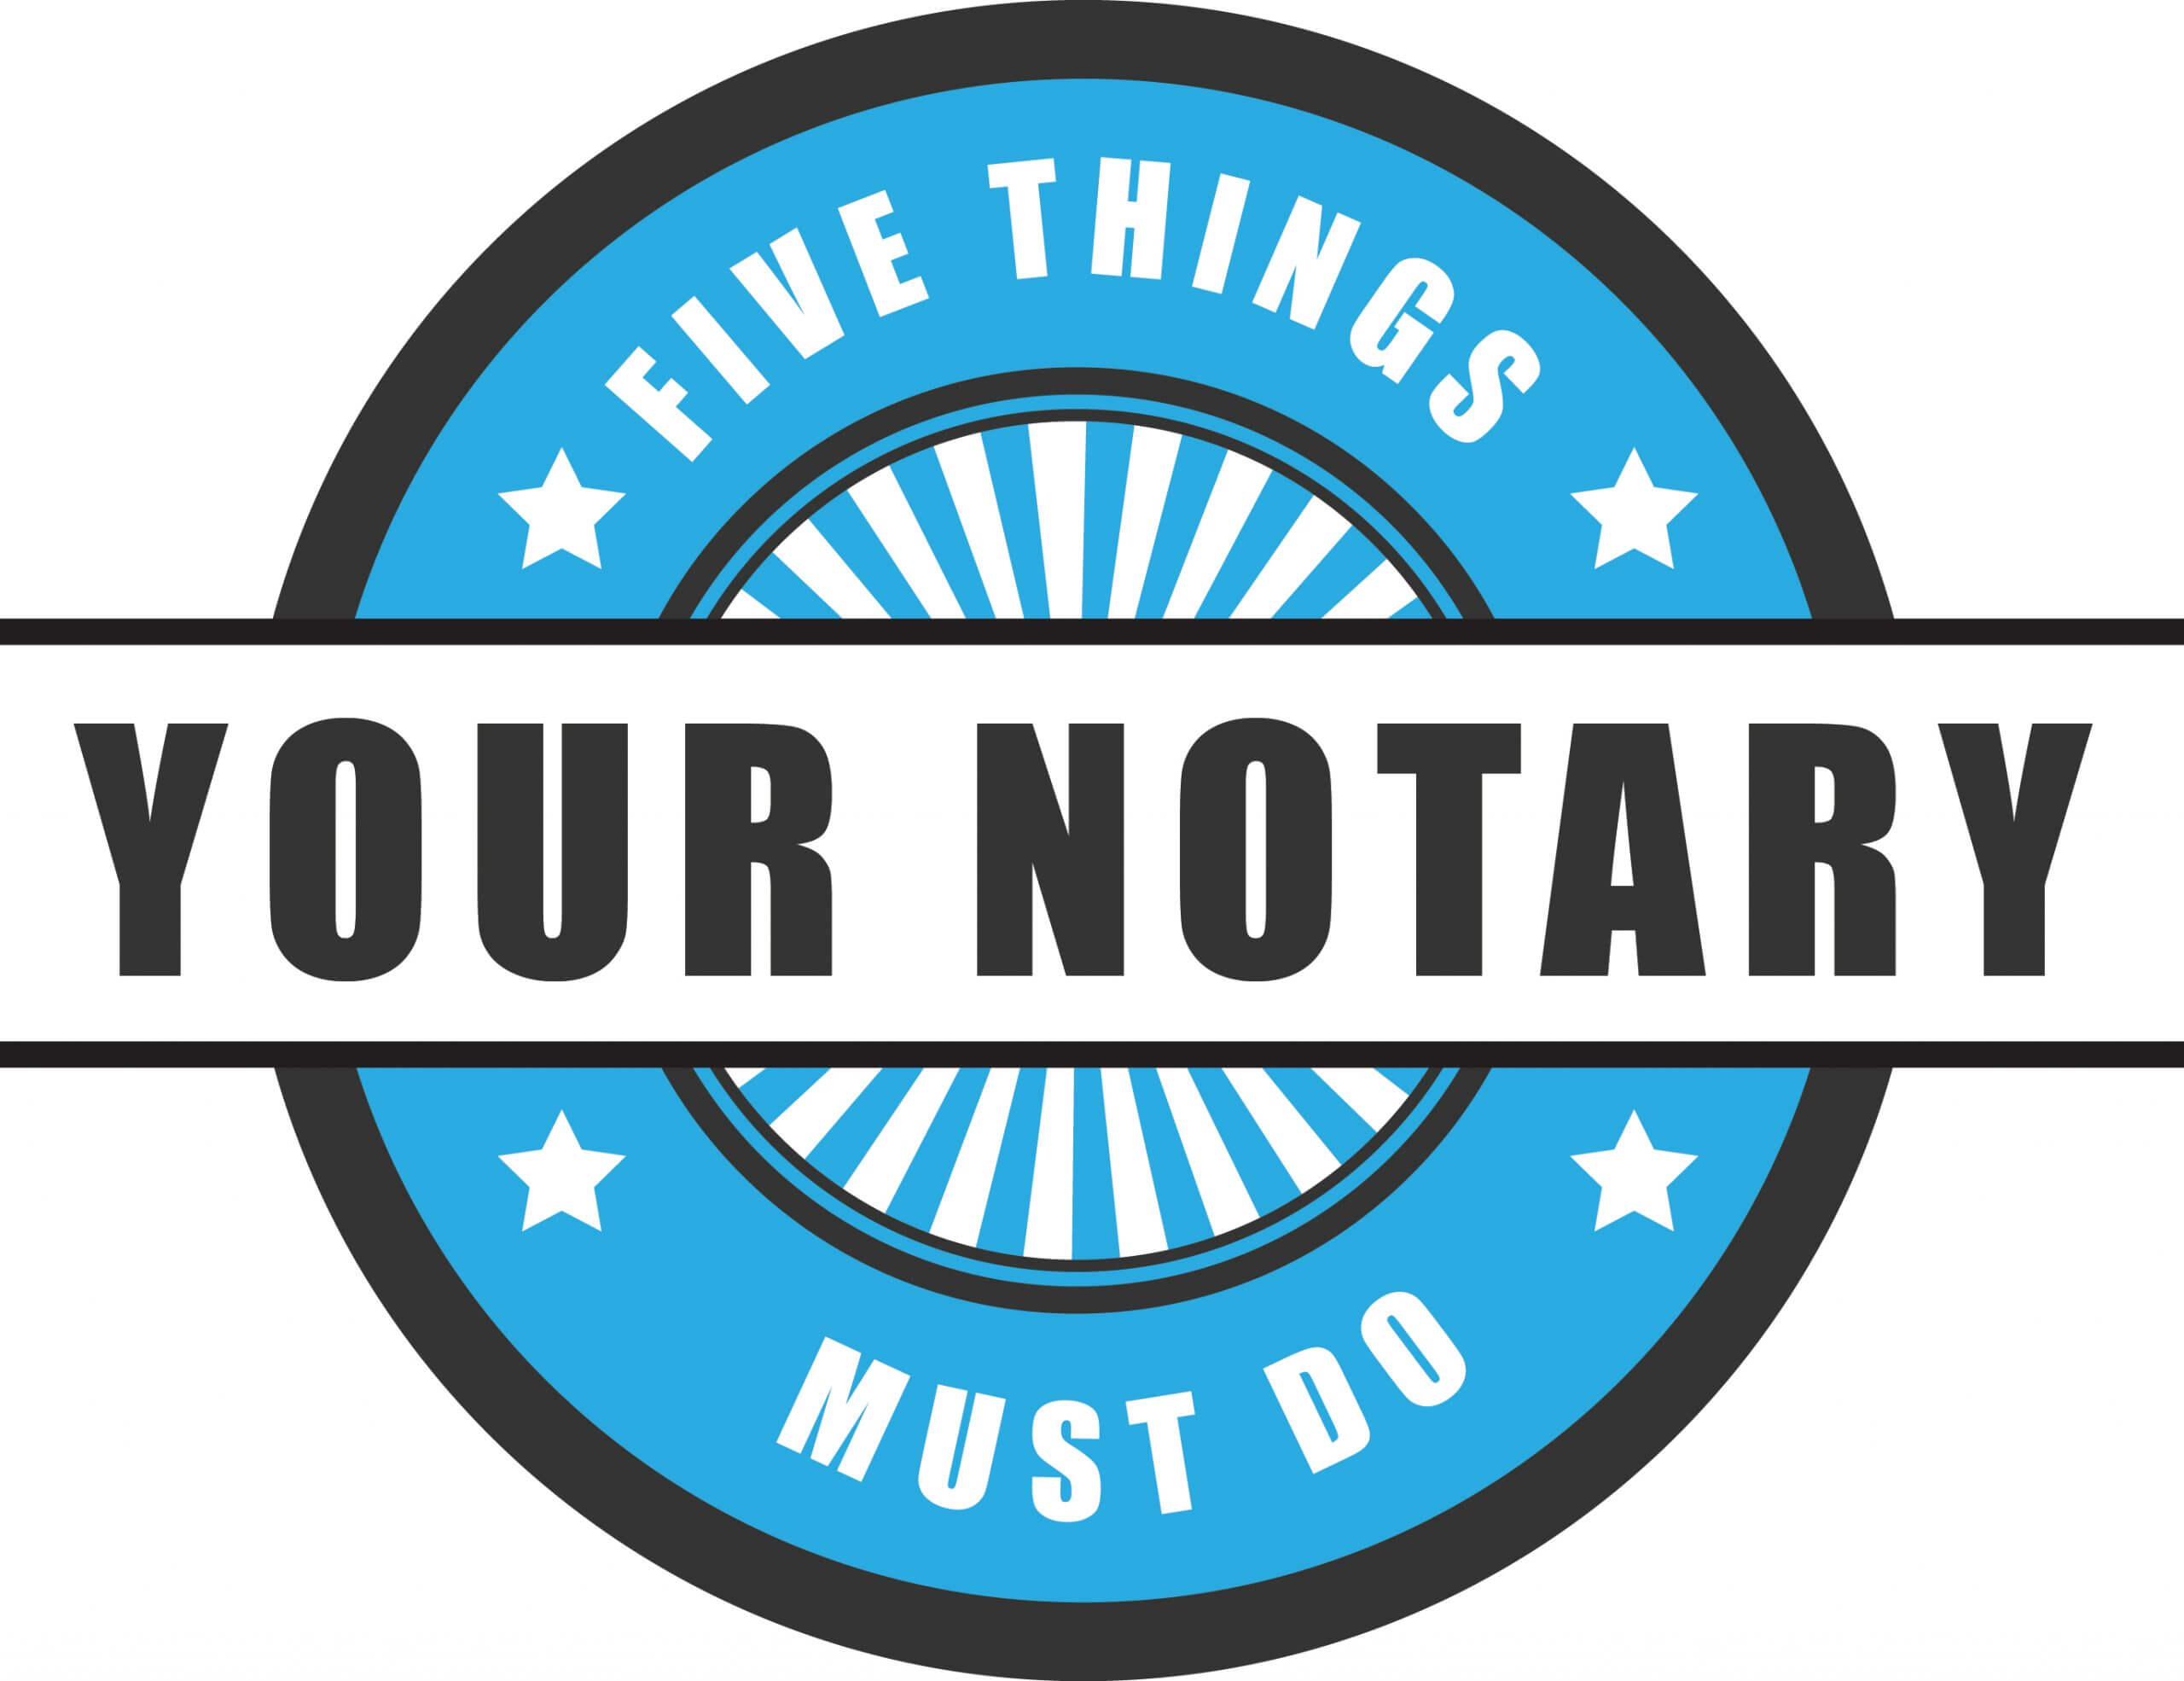 Five Things Your Notary Must Do